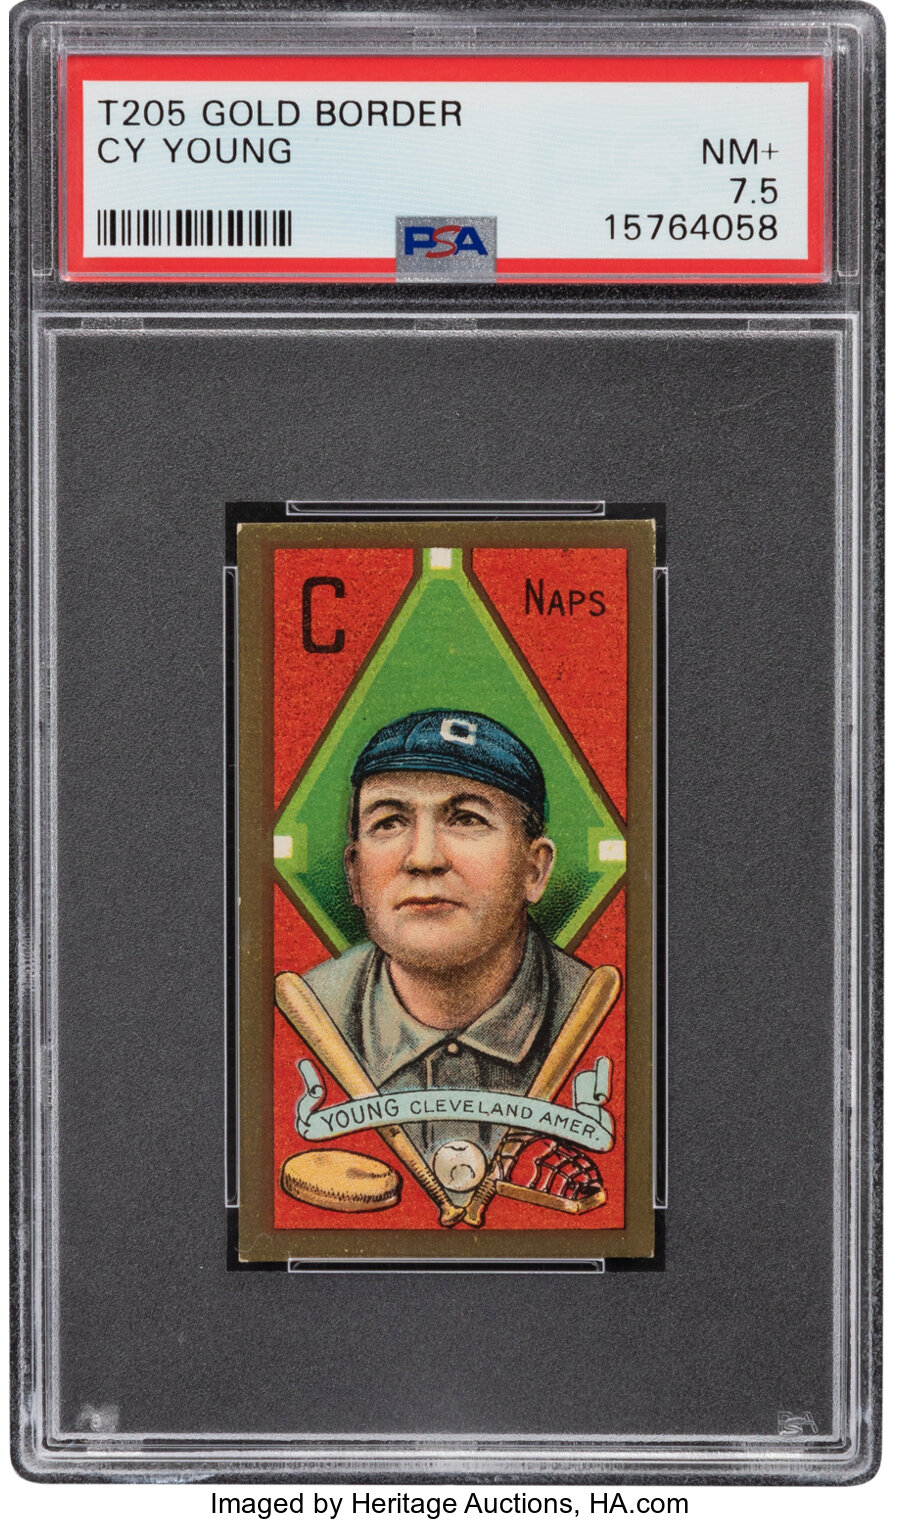 1911 T205 Gold Border Cy Young PSA NM+ 7.5